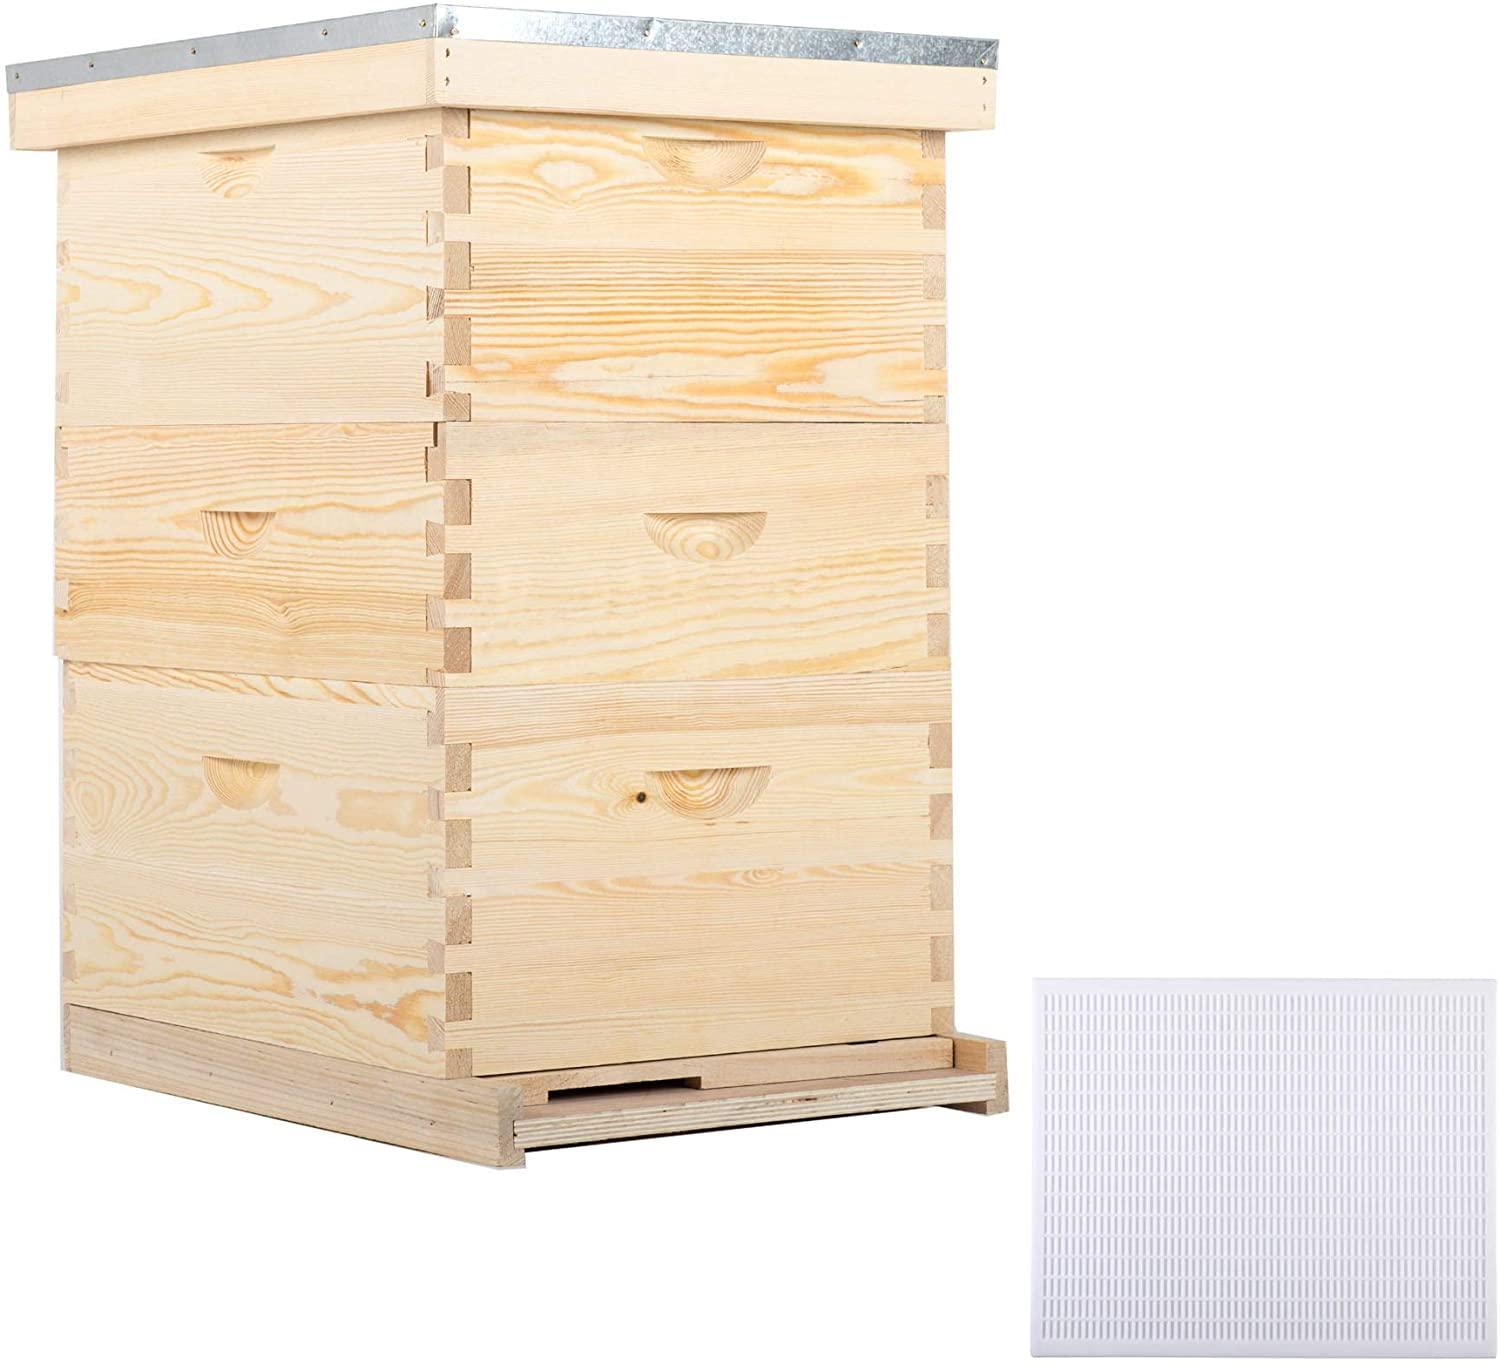 Creworks Bee Hive With 10 Medium And20 Deep Honeycomb Foundation Frames Bee Box For Beekeeper